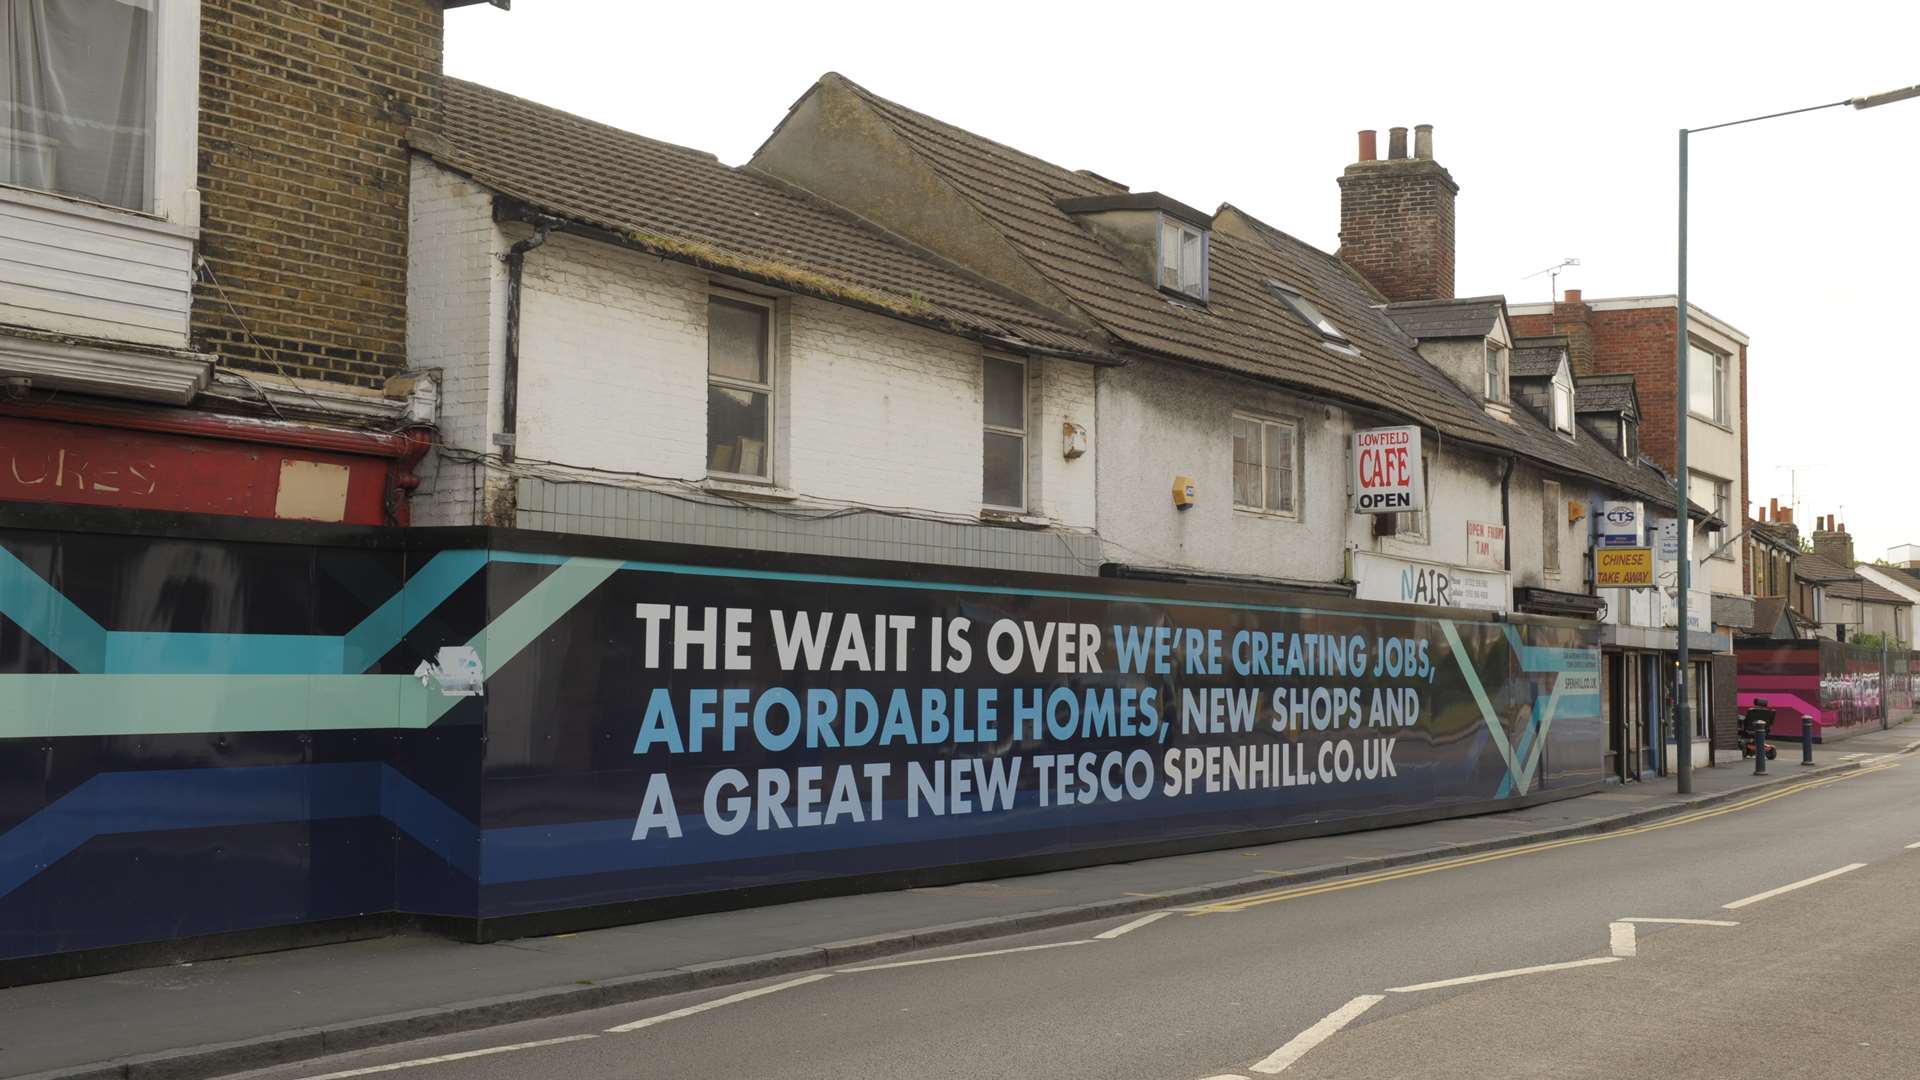 Tesco's message on the hoardings before they pulled out of Lowfield Street